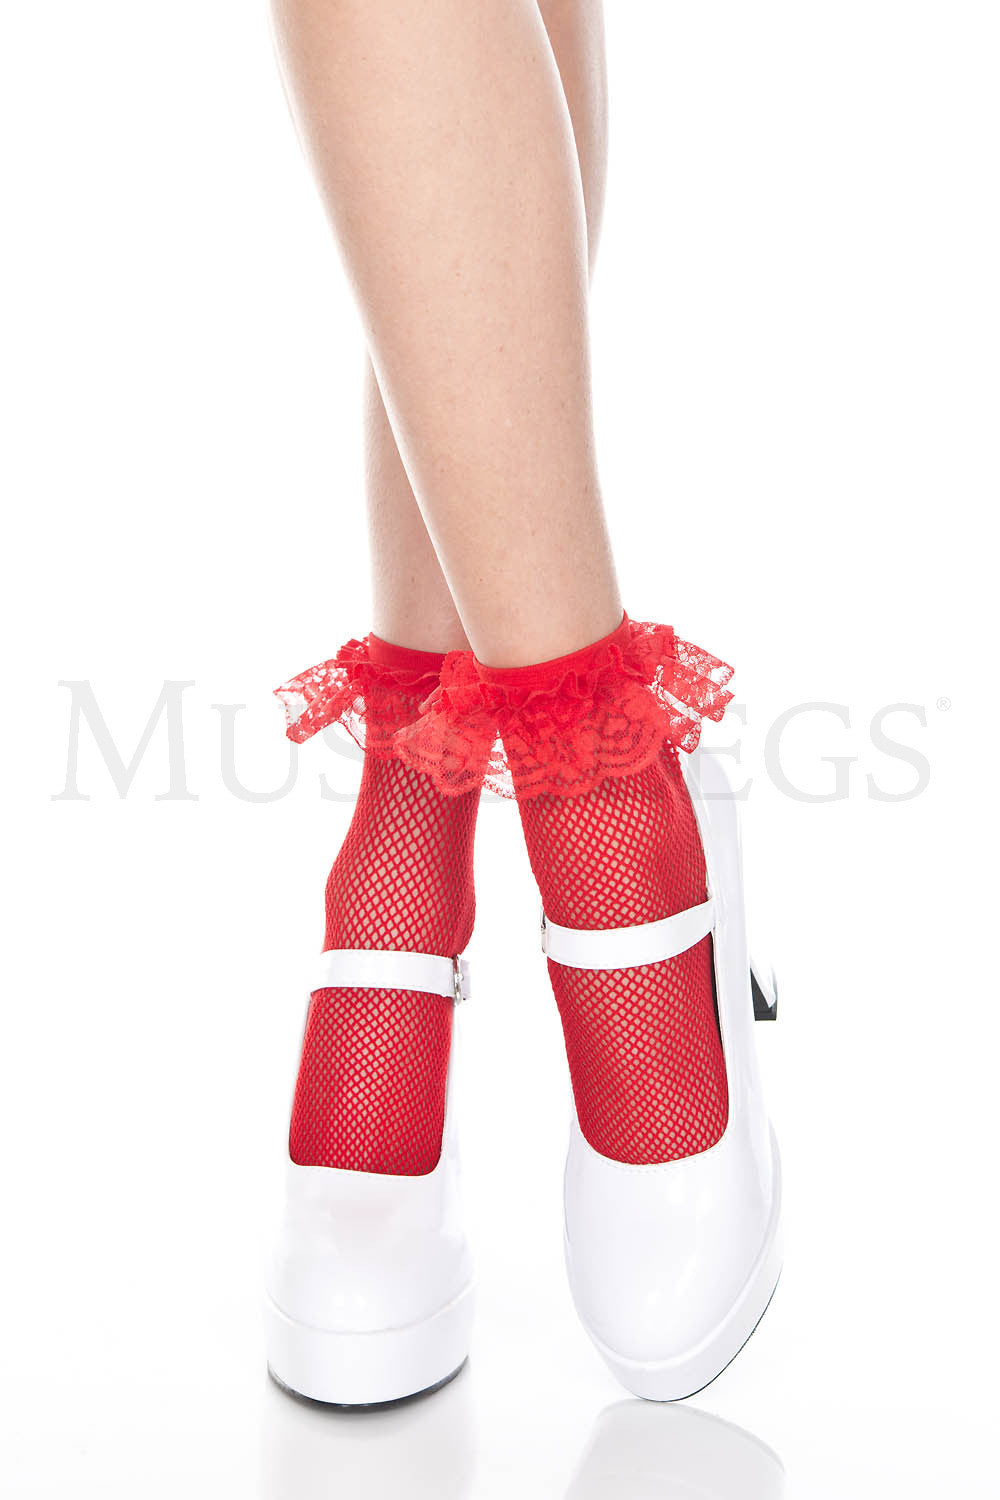 Fishnet Ruffle Top Ankle Hi Stockings in Black or Red